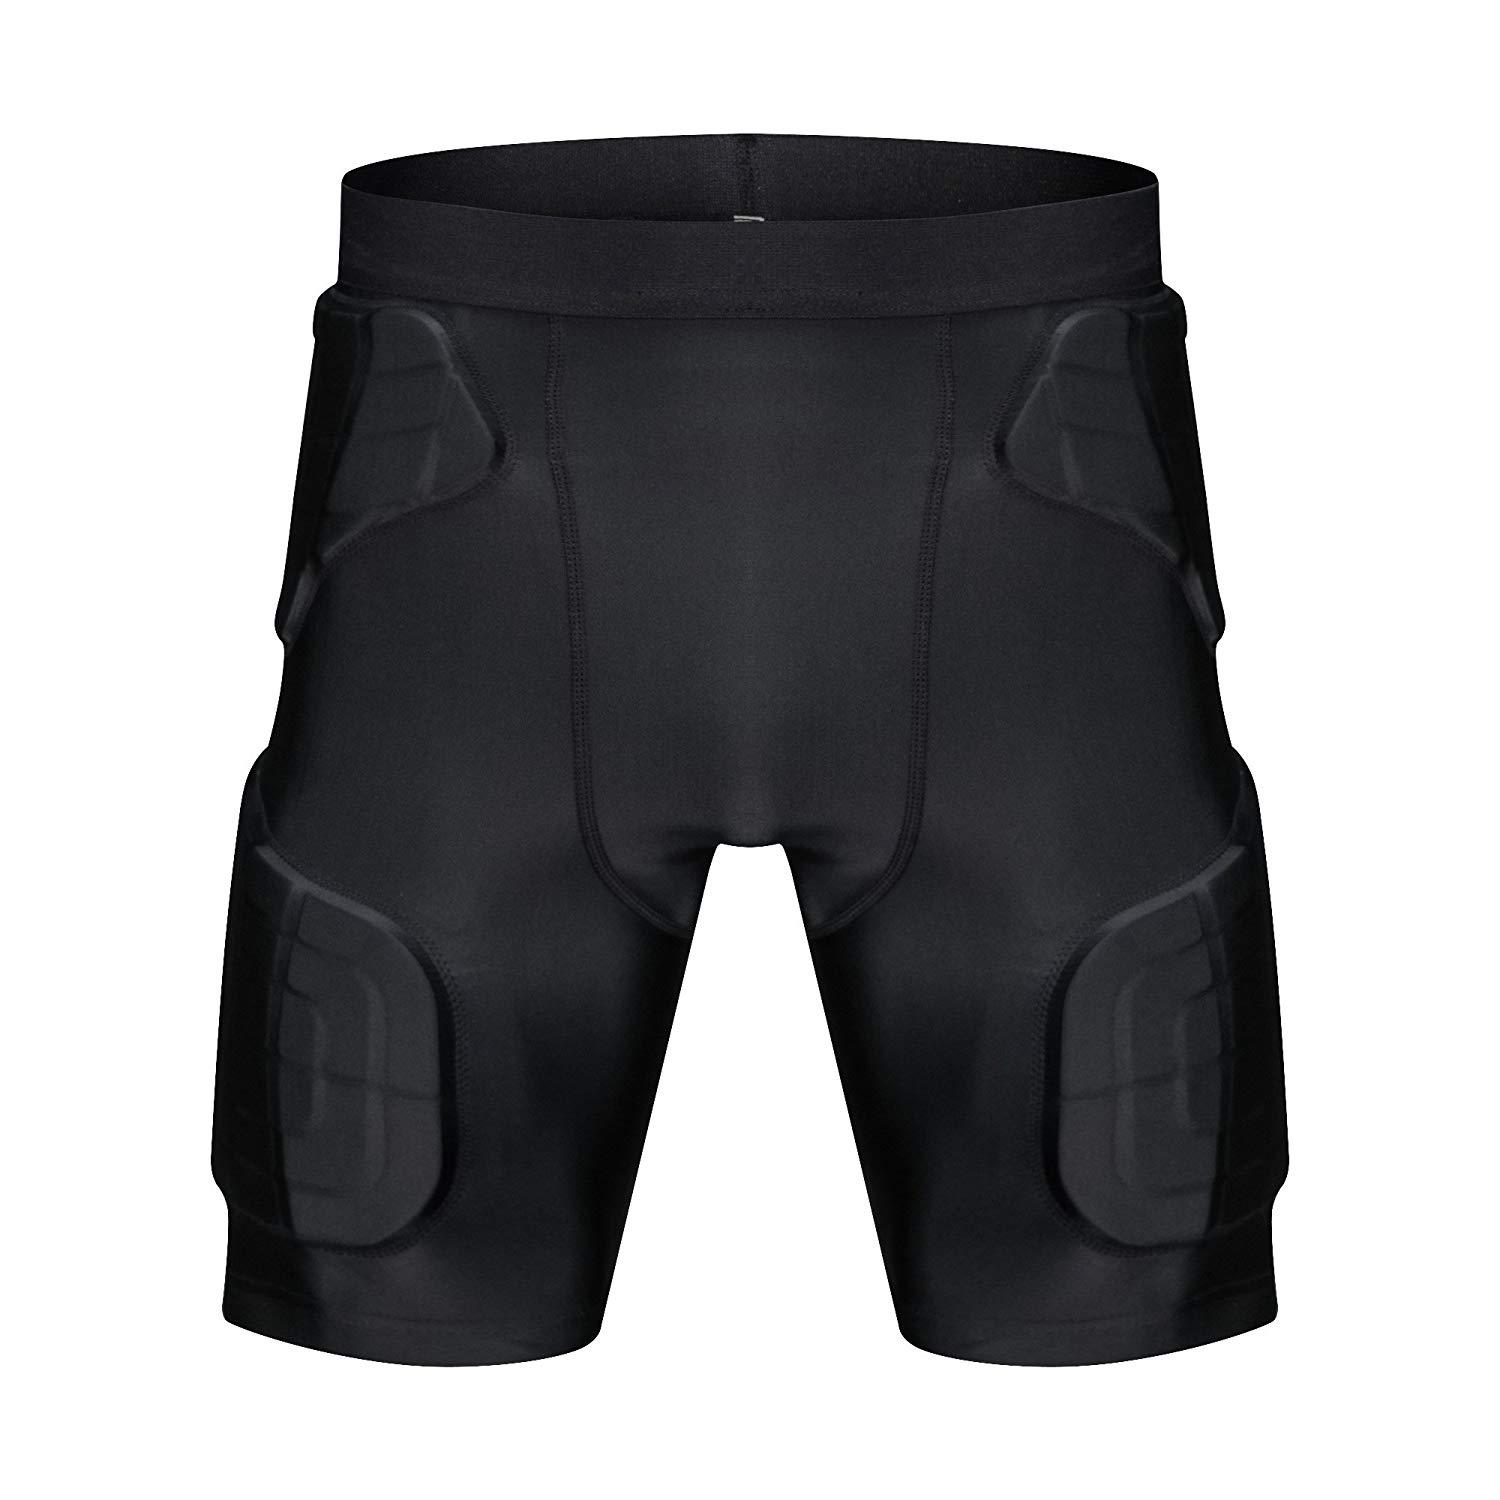 TUOY Men’s Padded Compression Shorts , Hip Protector.Hip, Tailbone ...